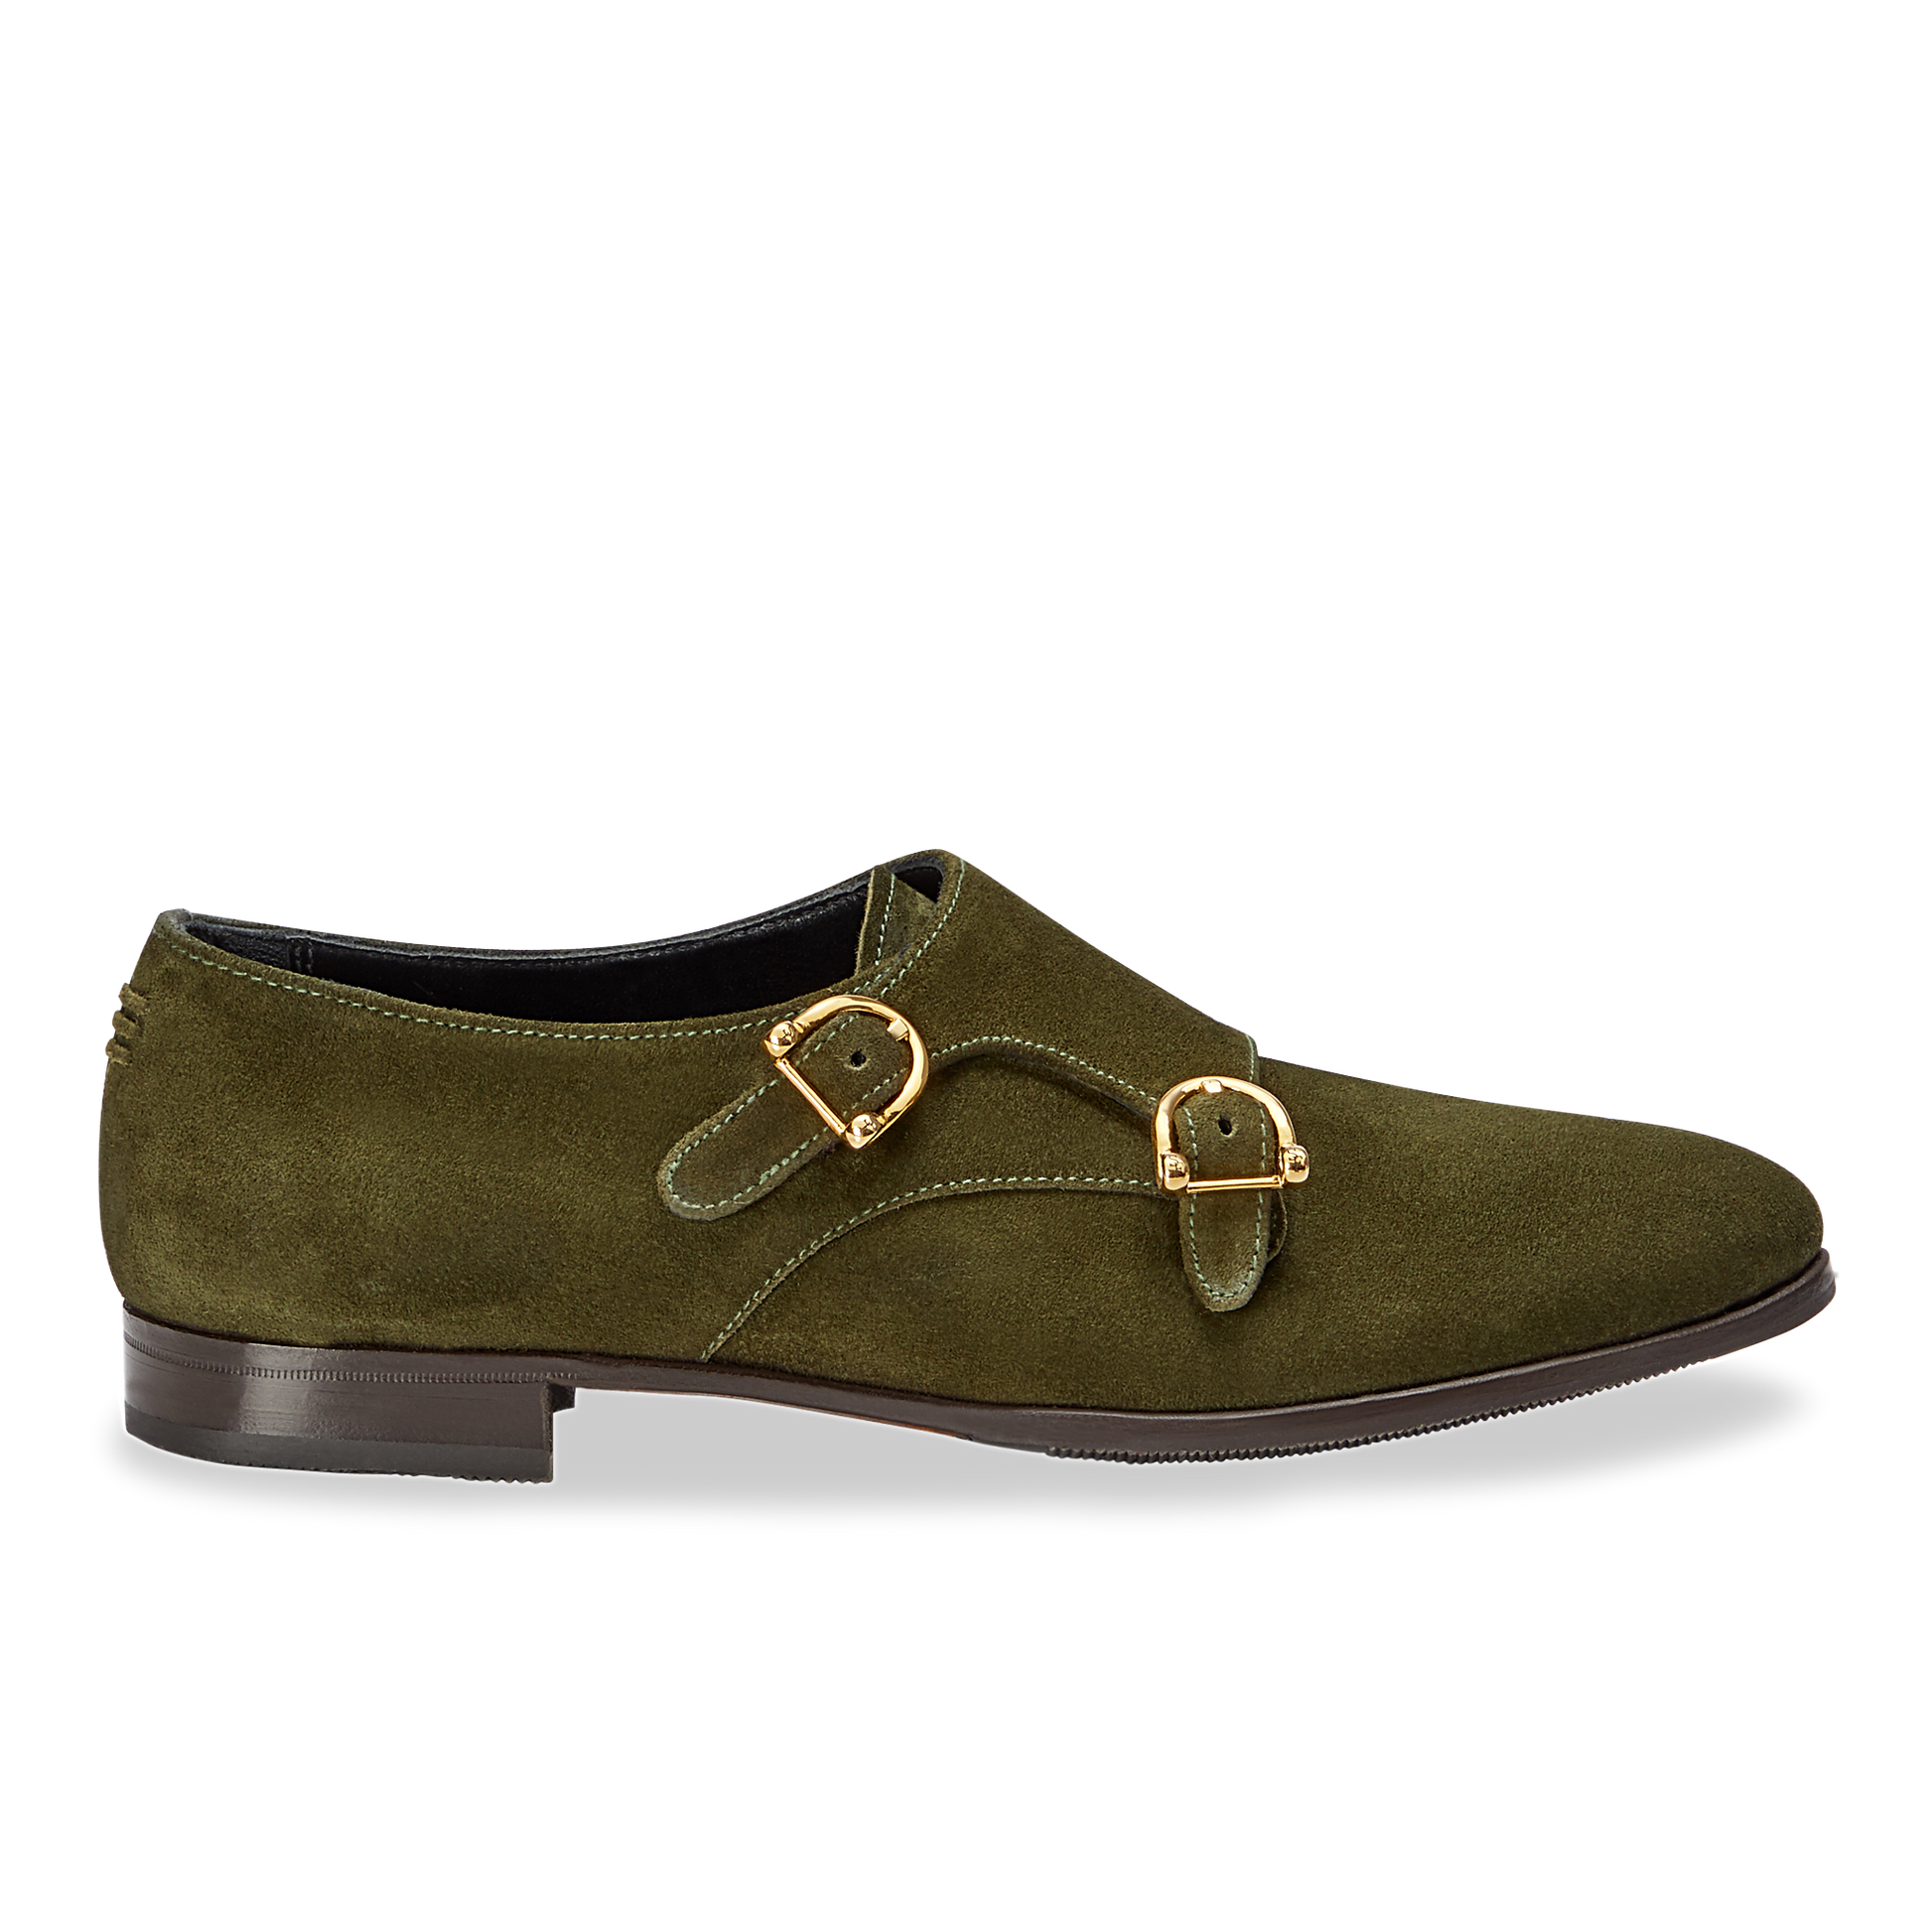 15mm Italian Made Almond Toe Double-monk strap Loafer Flat in Olive Crosta